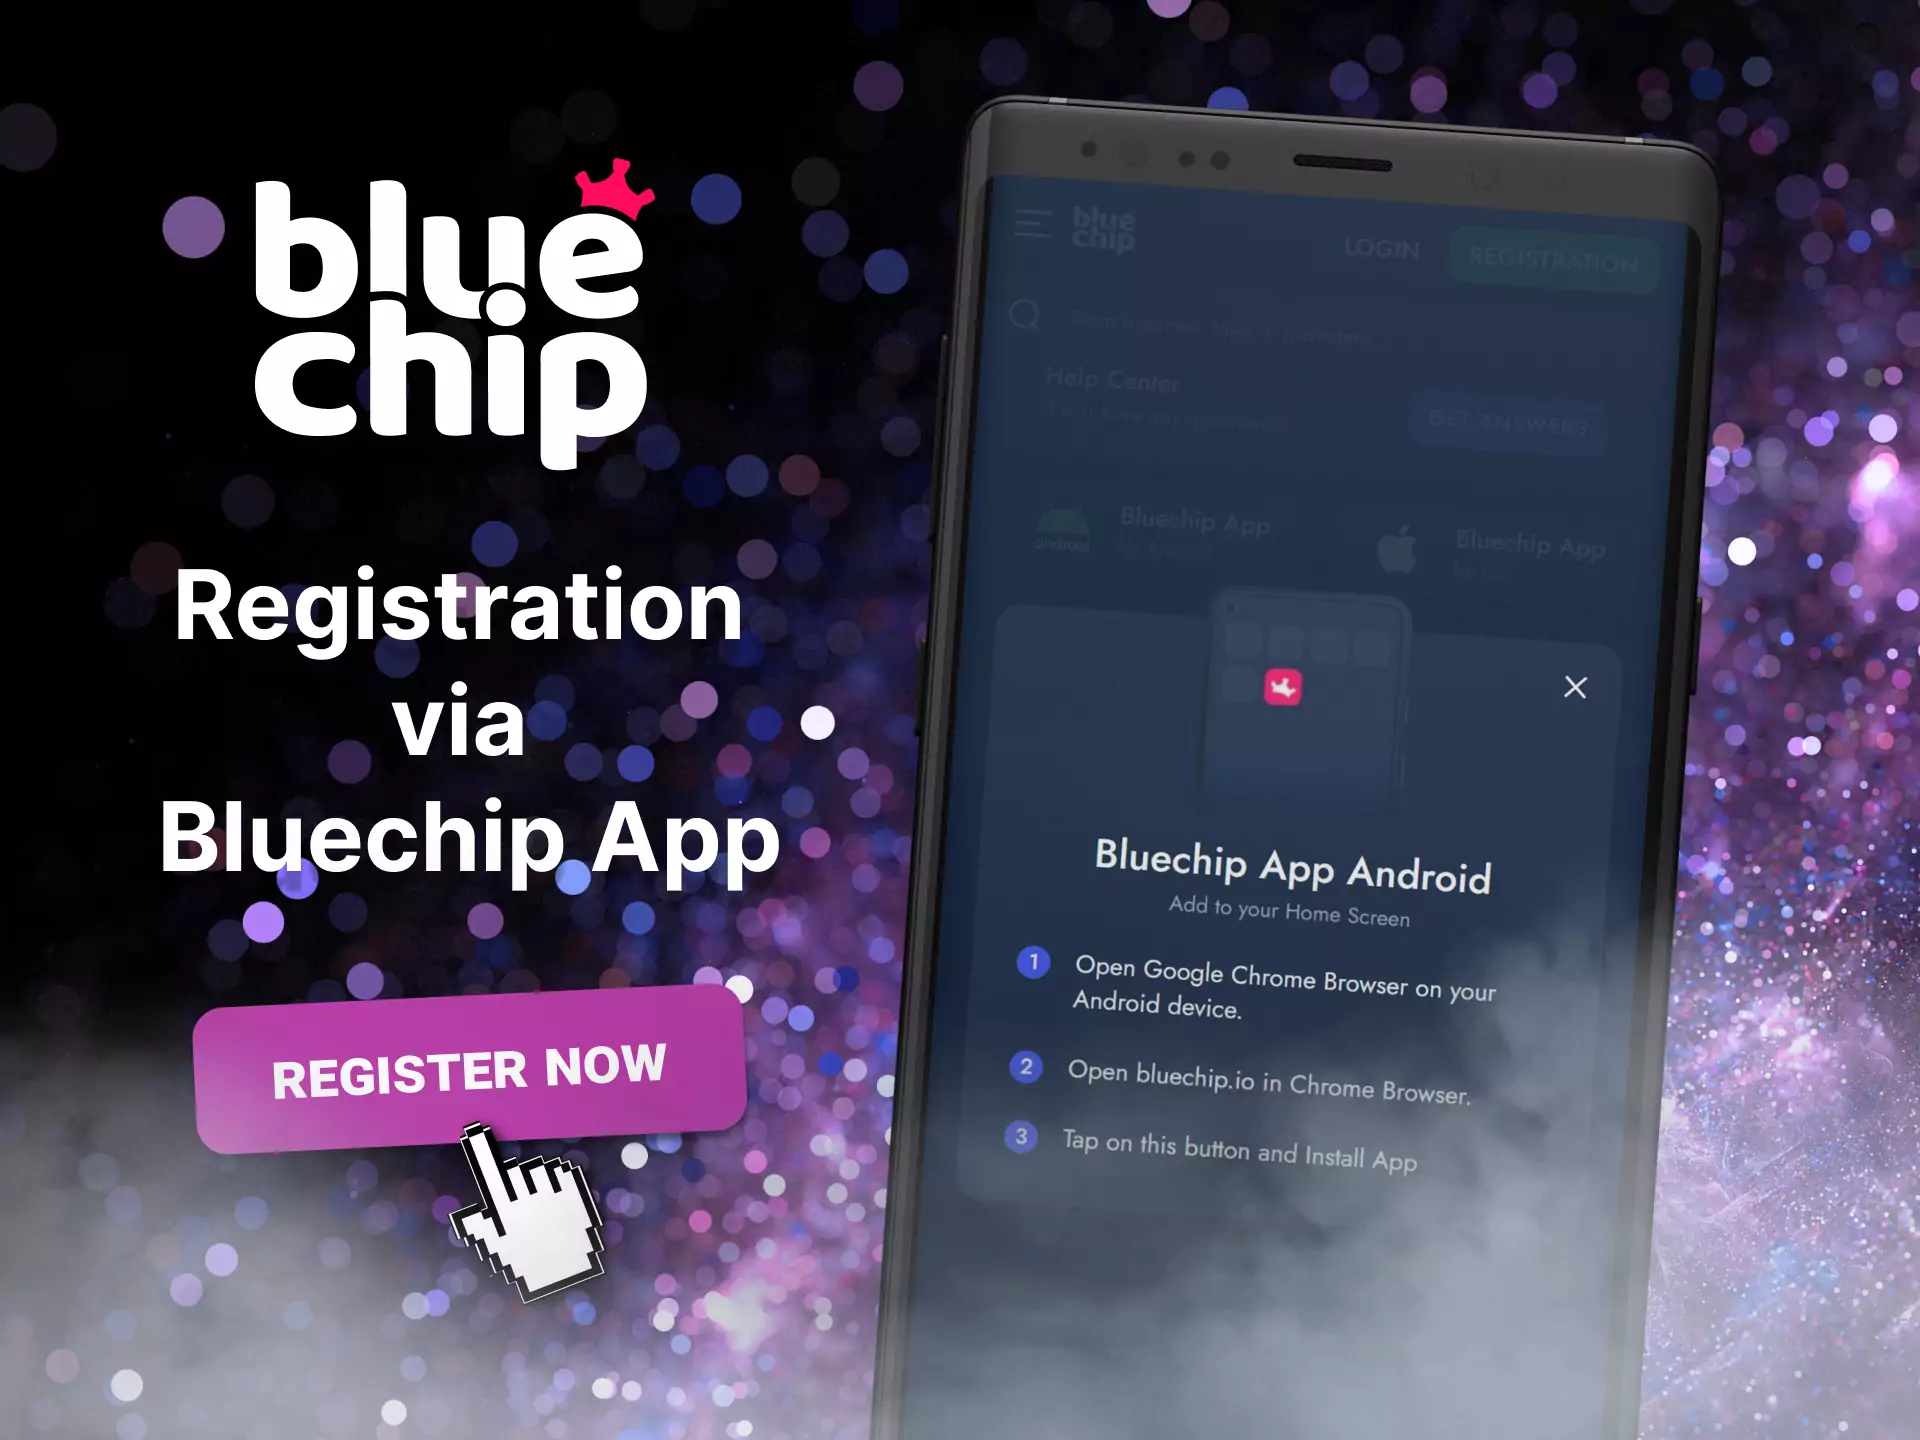 Sign up for Bluechip using the app on your device.